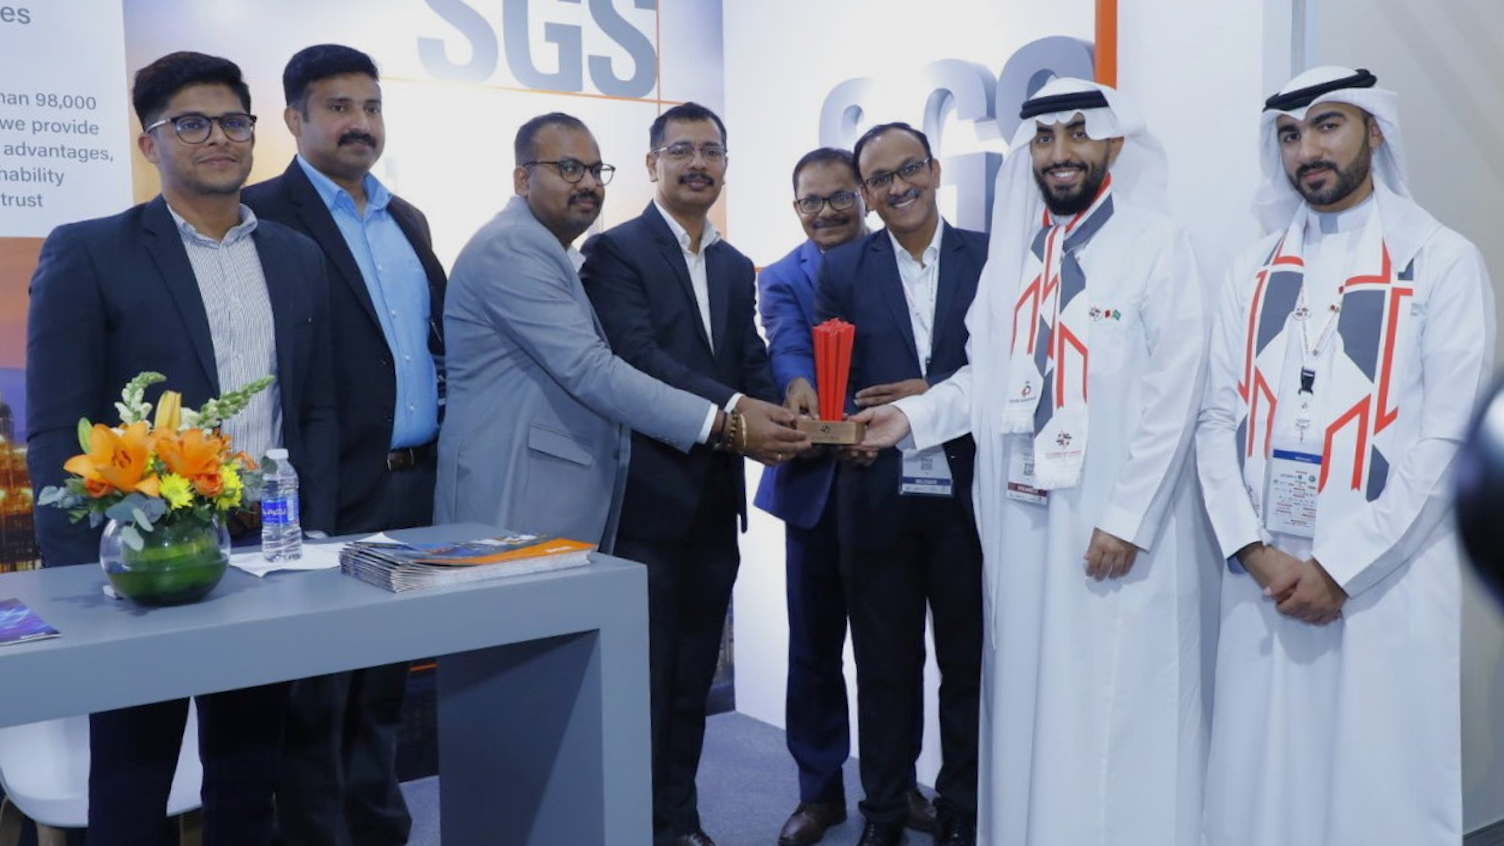 SGS Shared Expertise in AIM at the Middle East Corrosion Conference in Bahrain